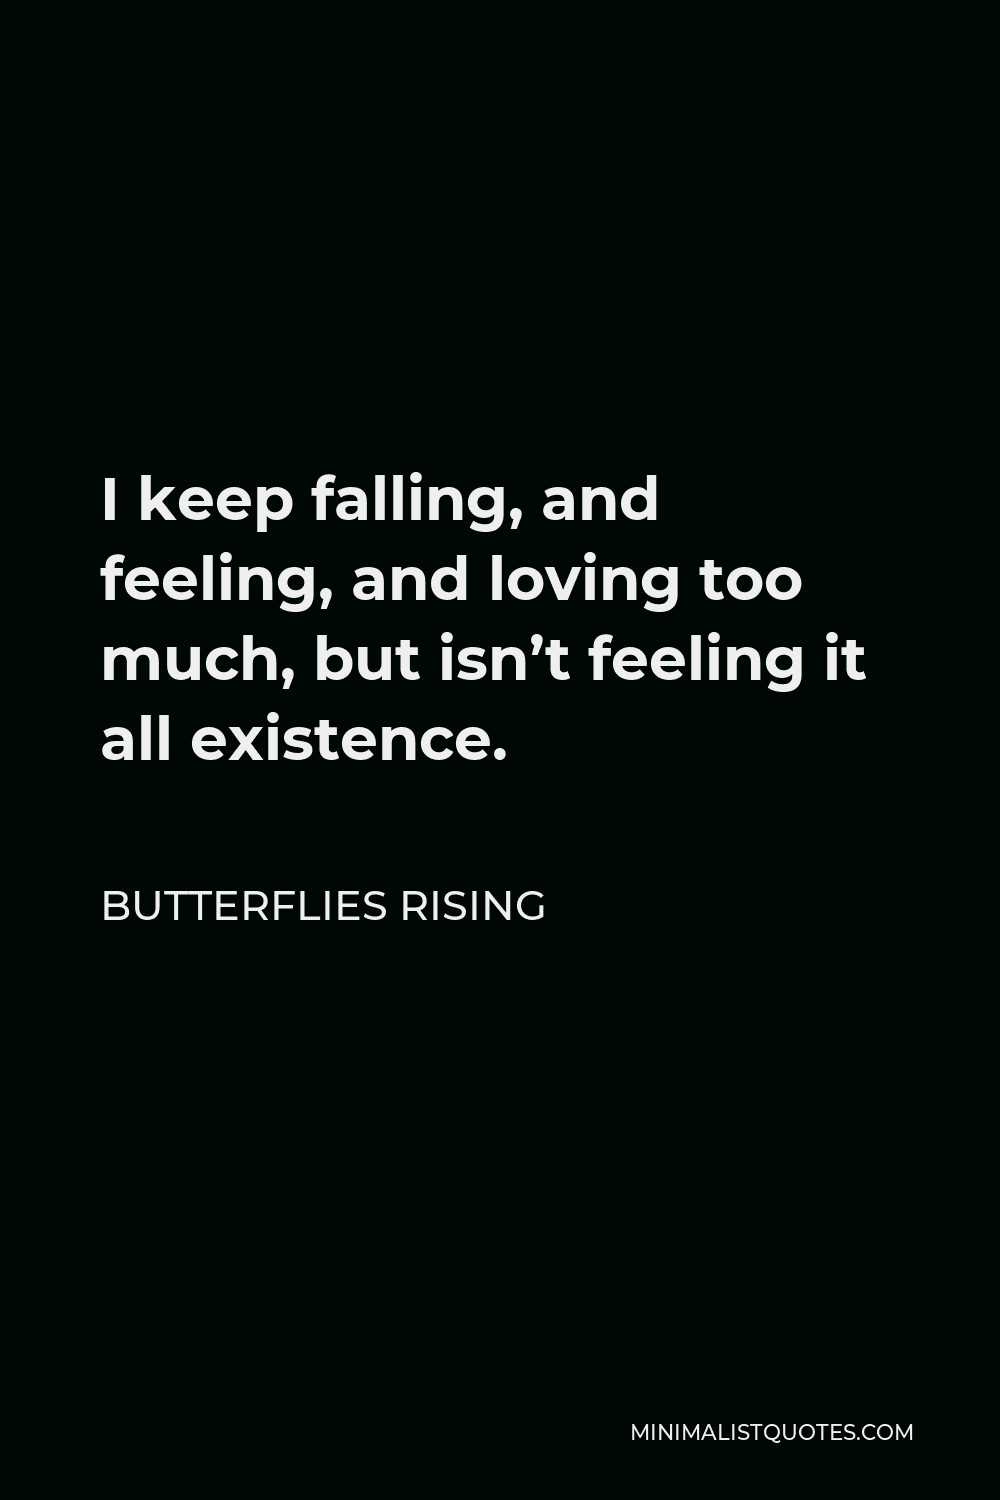 Butterflies Rising Quote - I keep falling, and feeling, and loving too much, but isn’t feeling it all existence.